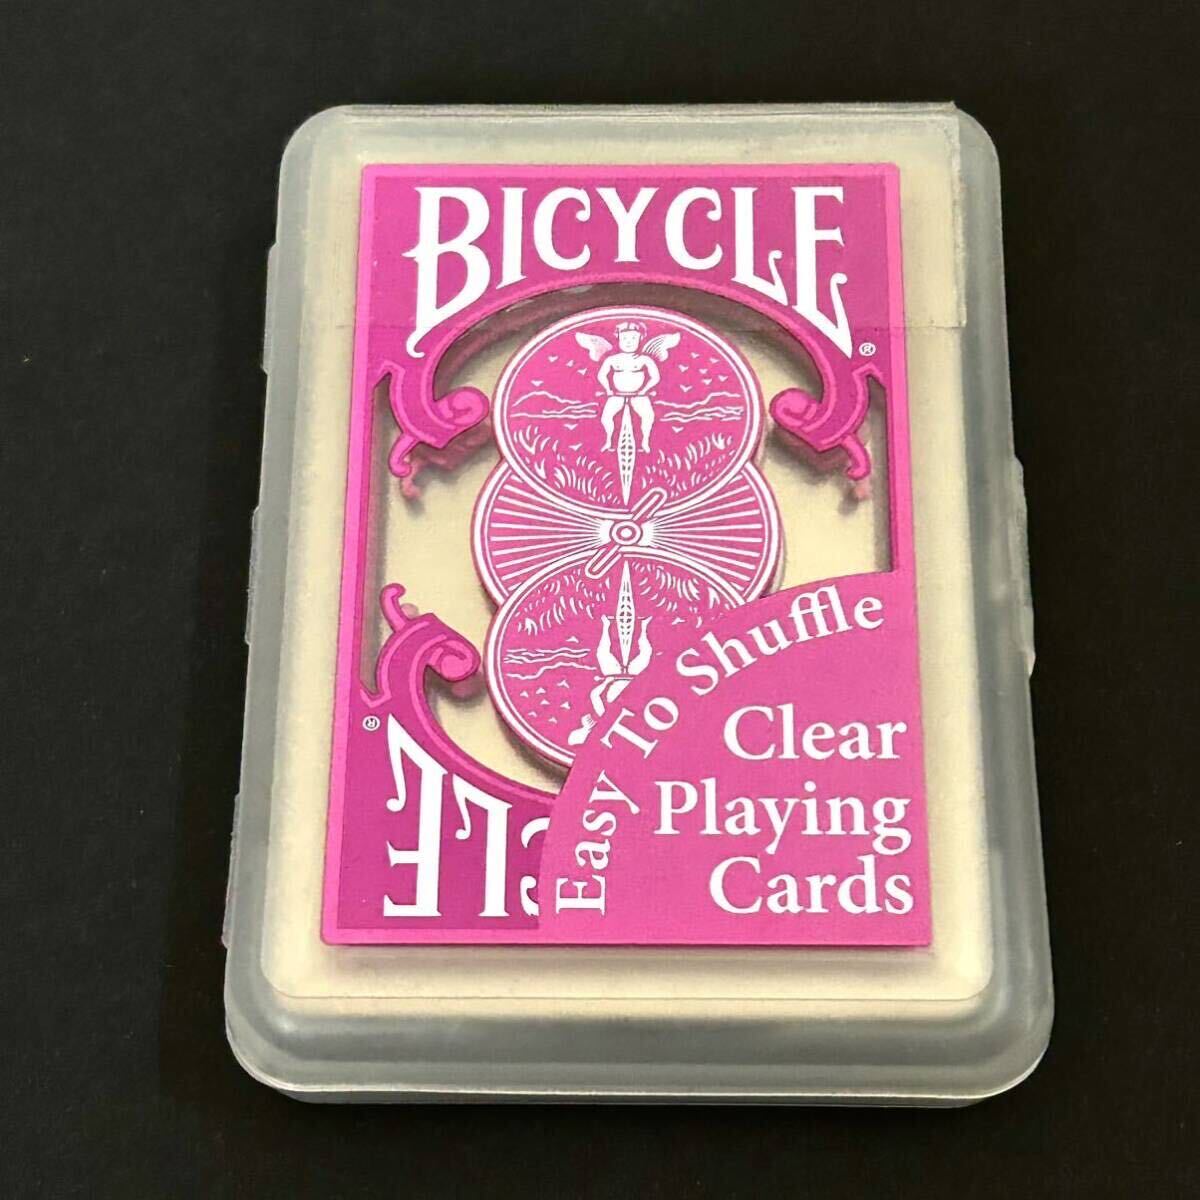 Bicycle Clear Playing Cards バイスクル クリア トランプ ピンク【絶版】の画像1